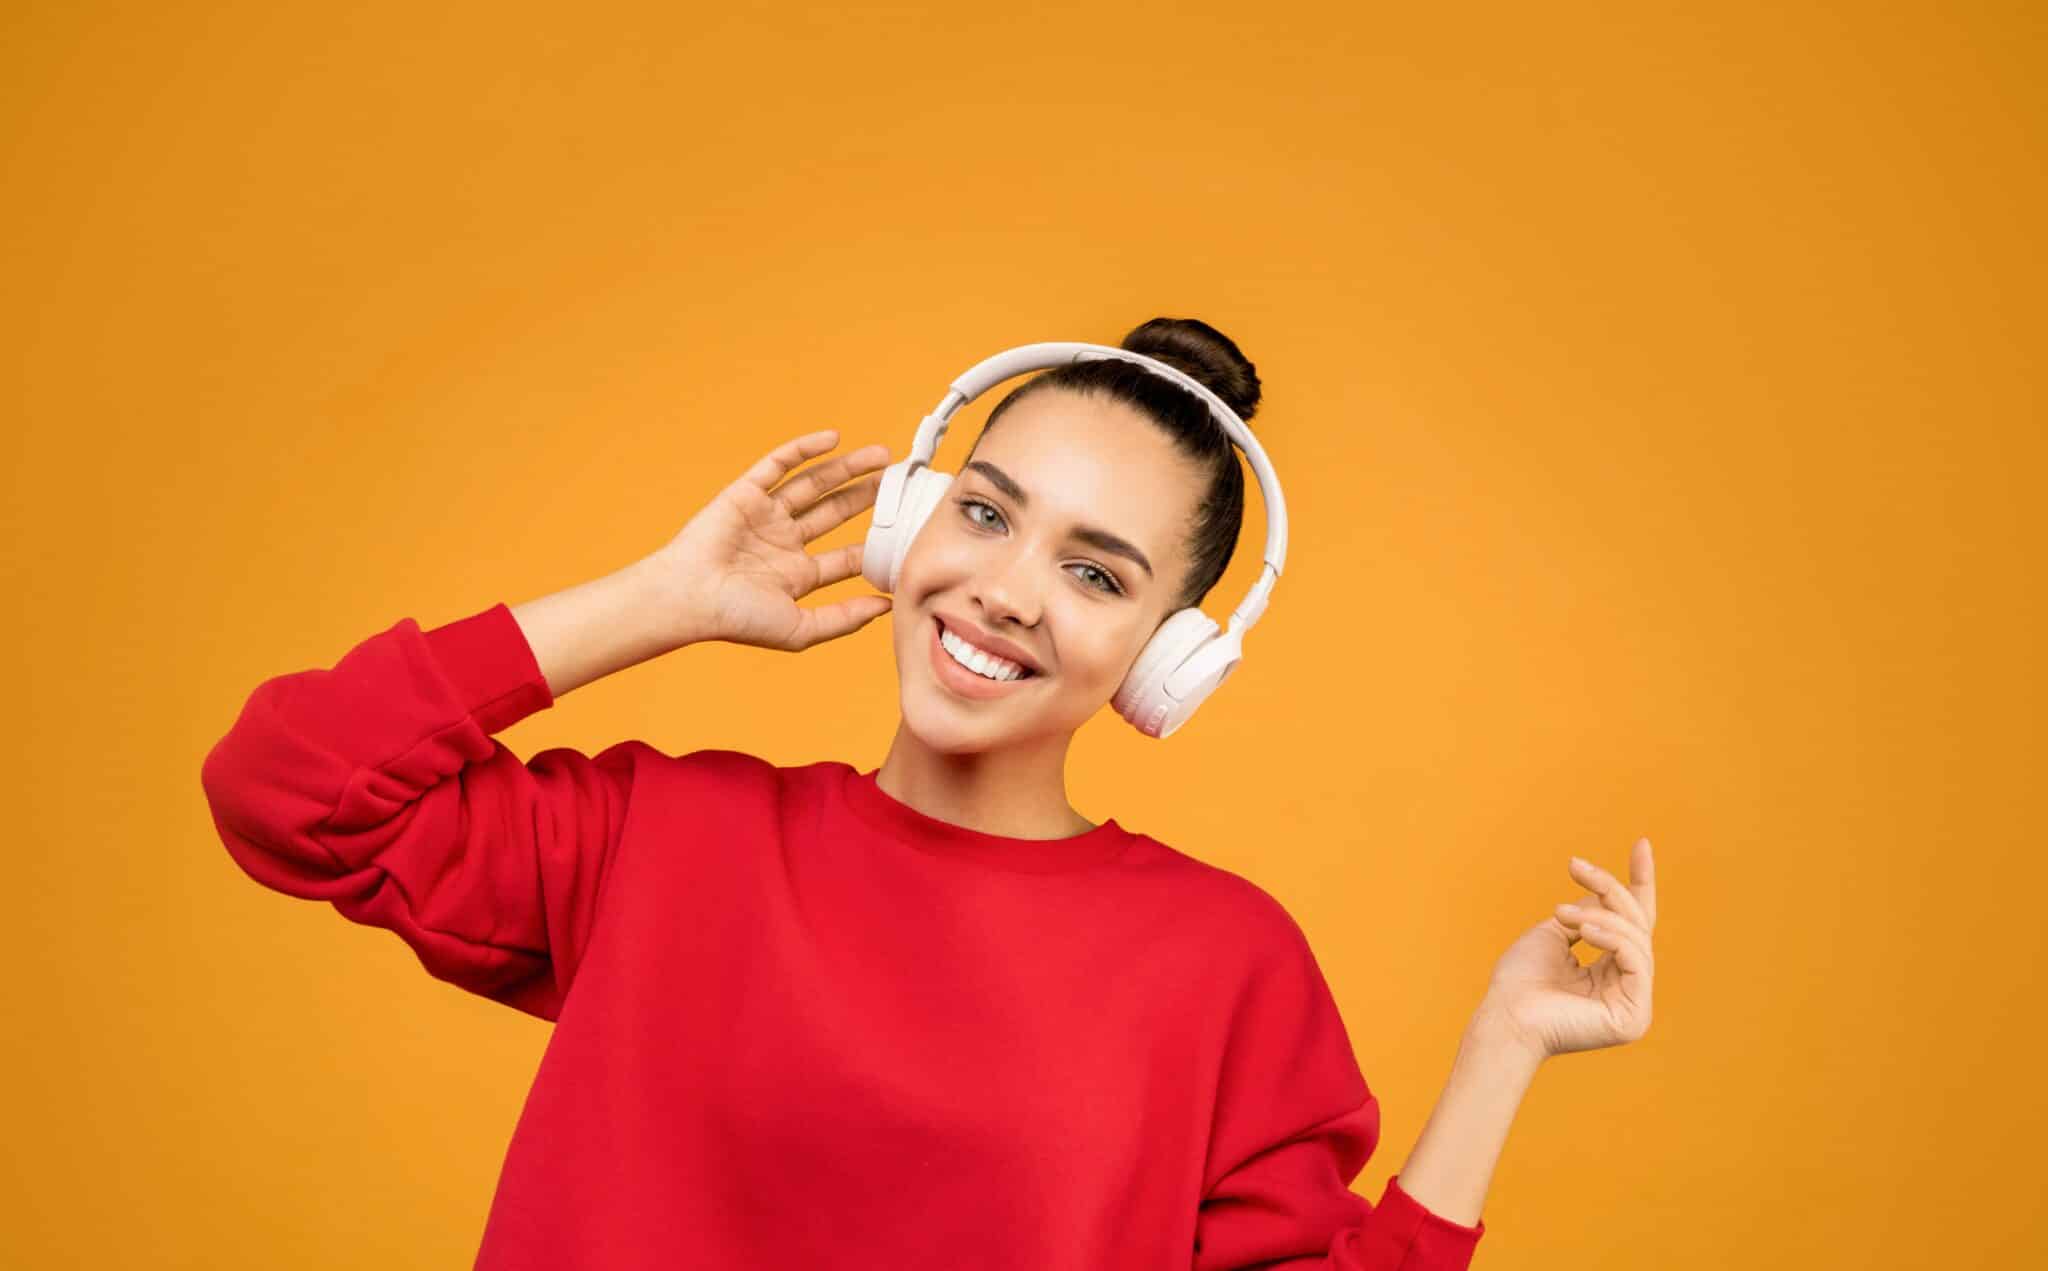 Woman in a red sweater wearing headphones.